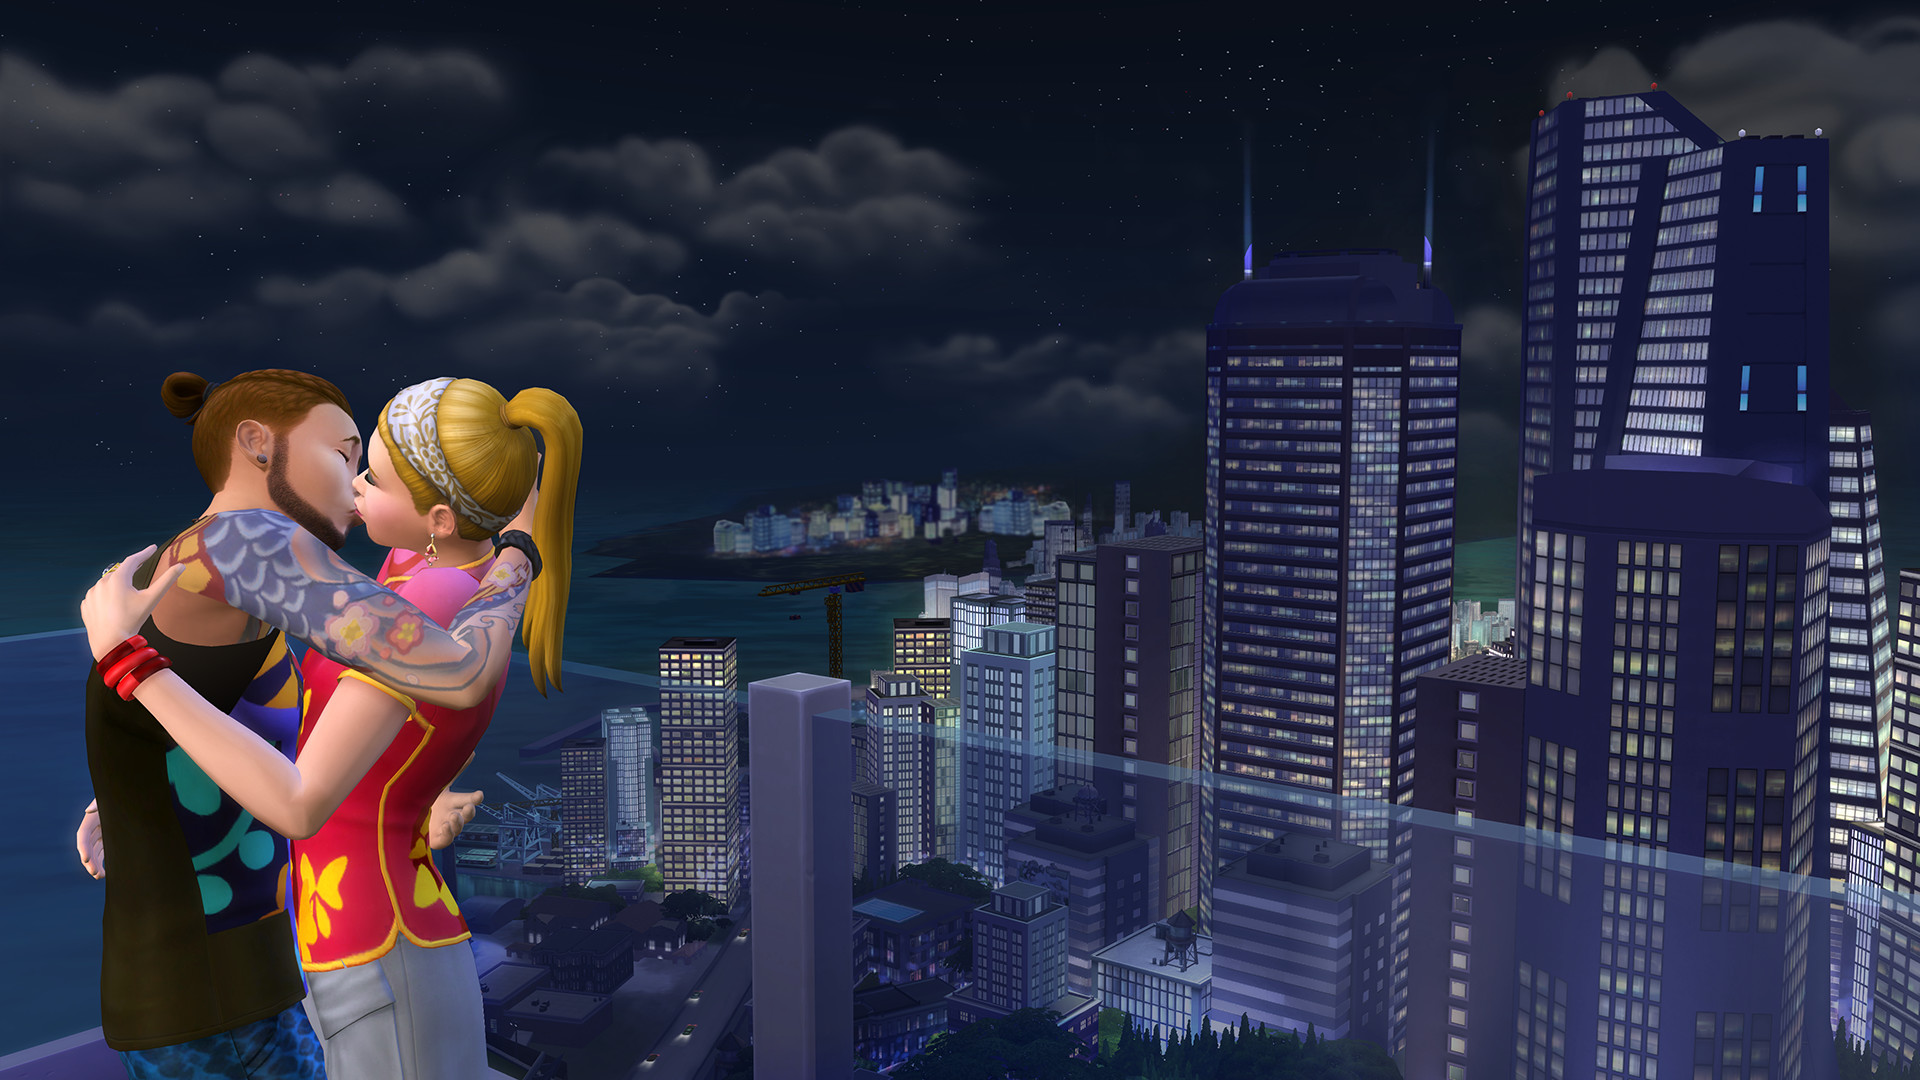 The Sims 4 Bundle Pack: City Living, Vampires, and Vintage Glamour DLCs Origin